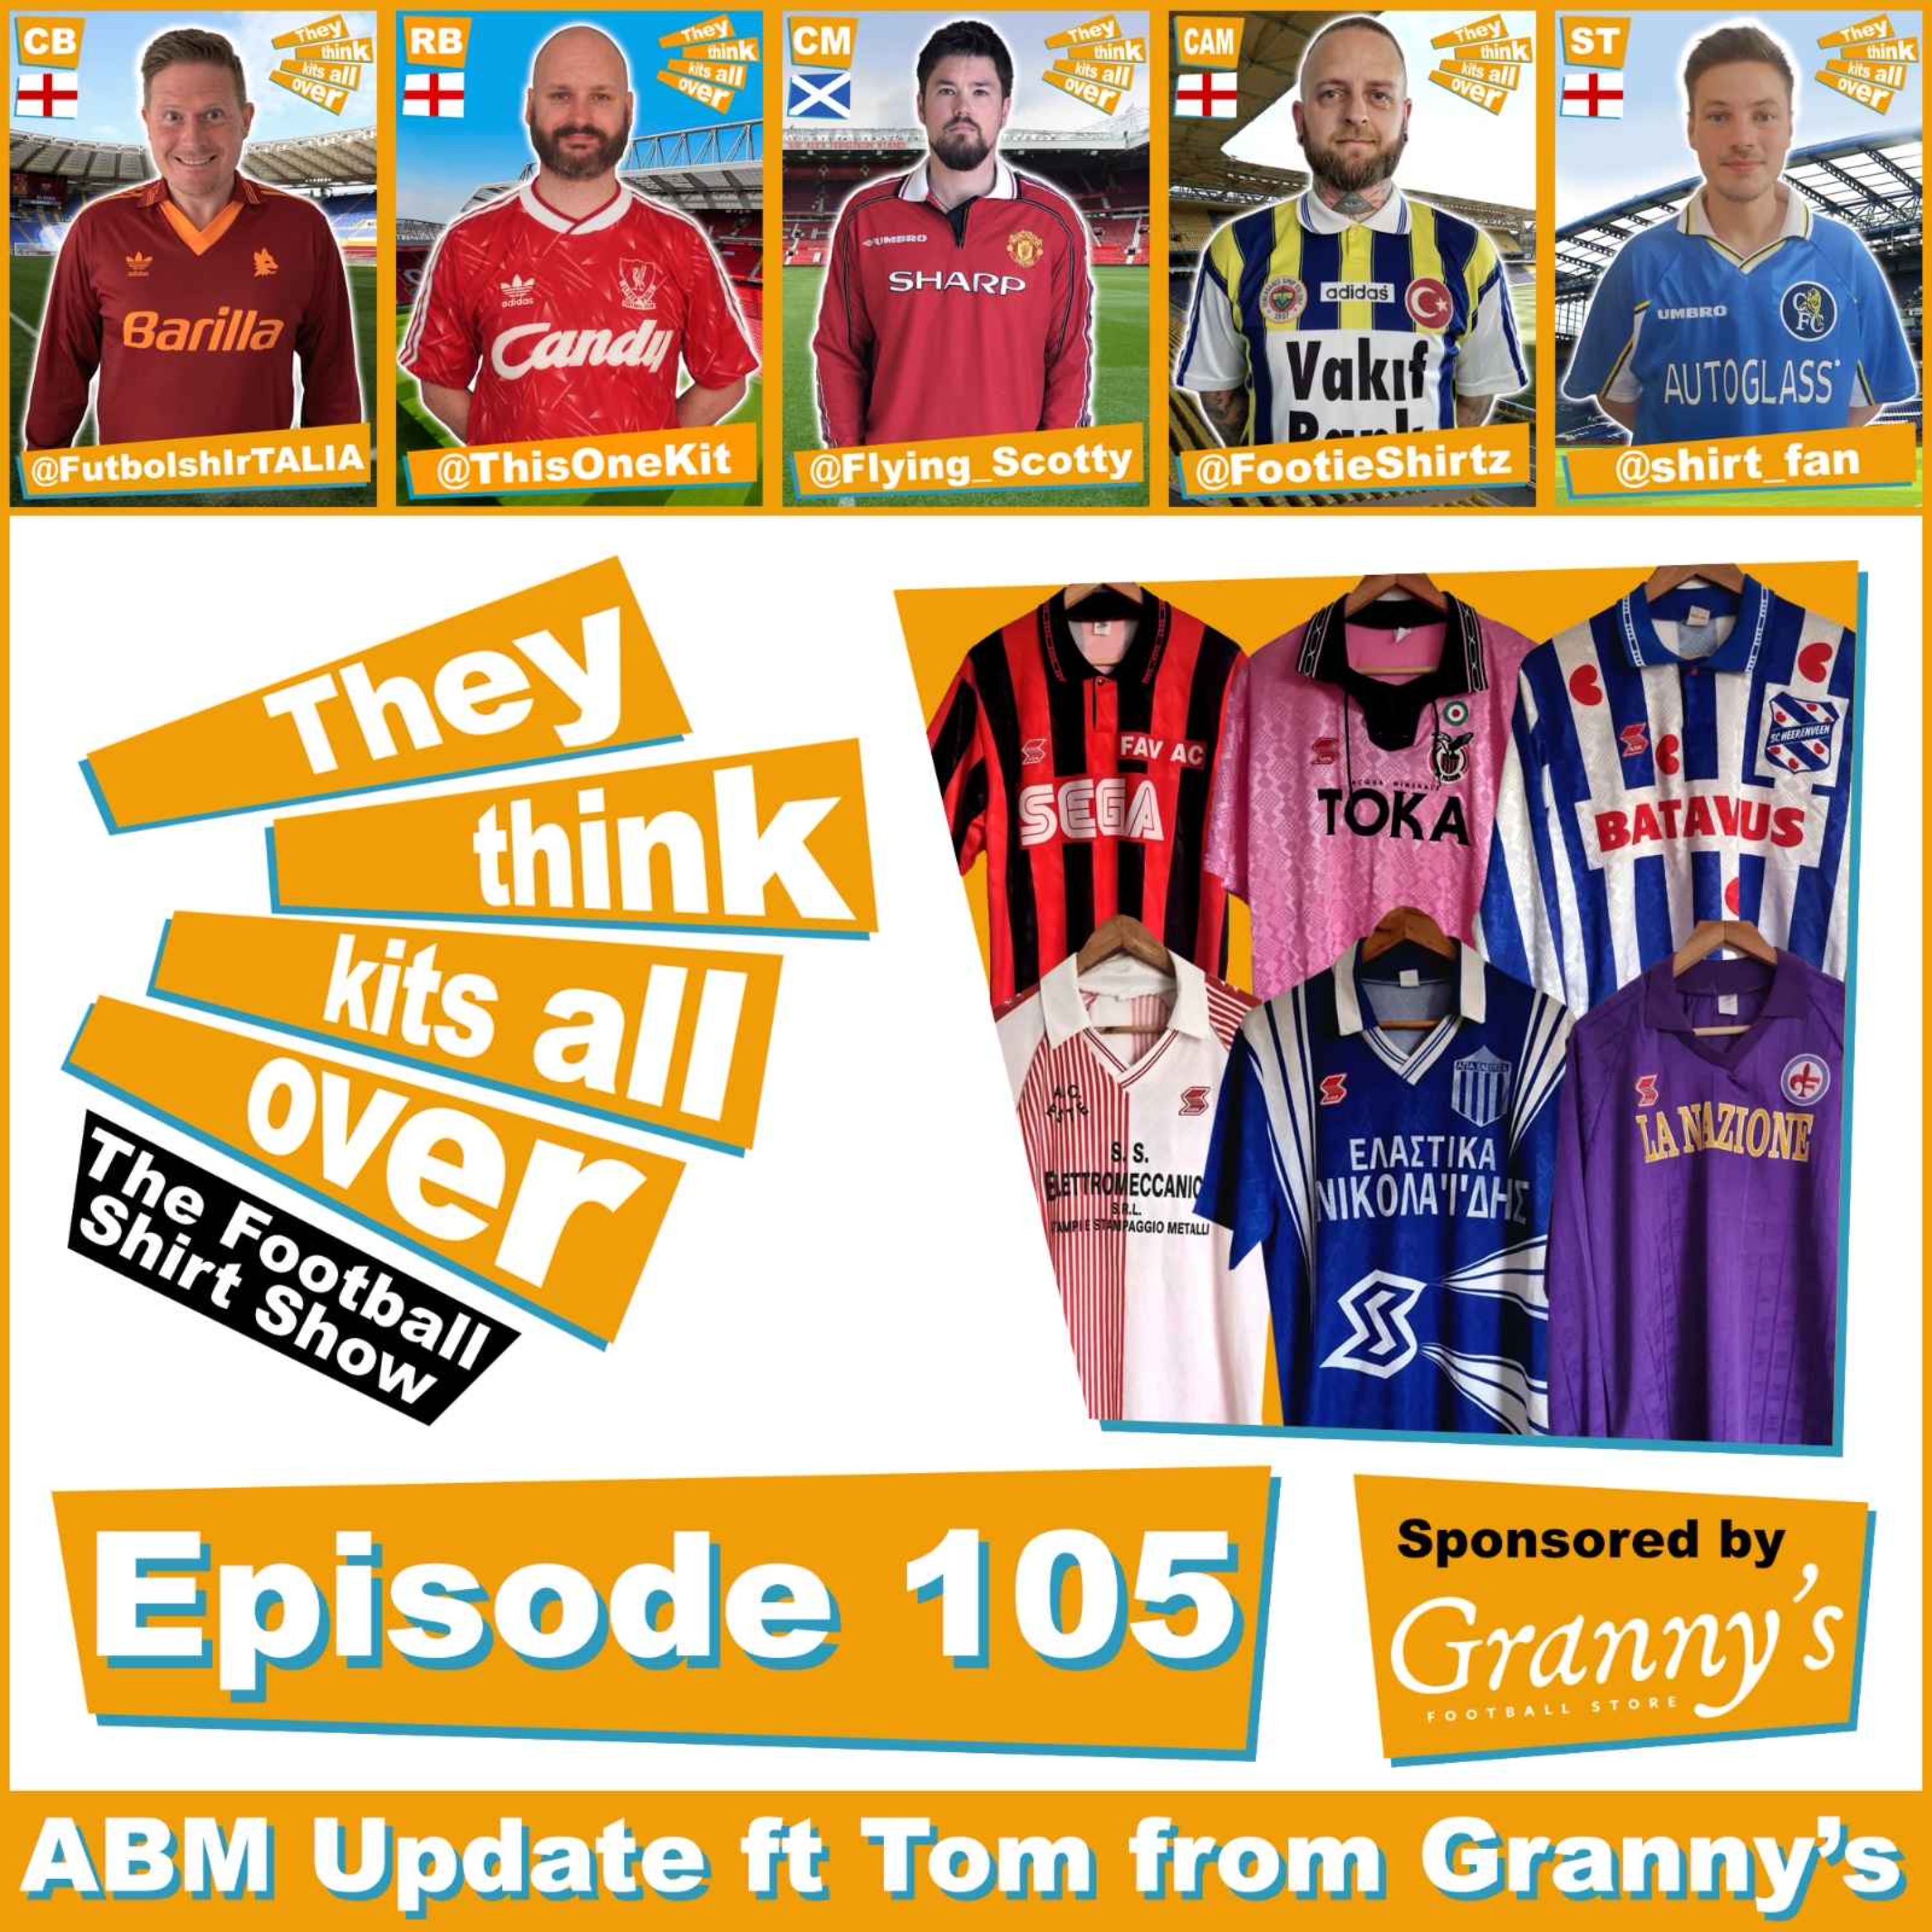 Episode 105 - ABM update from Granny!